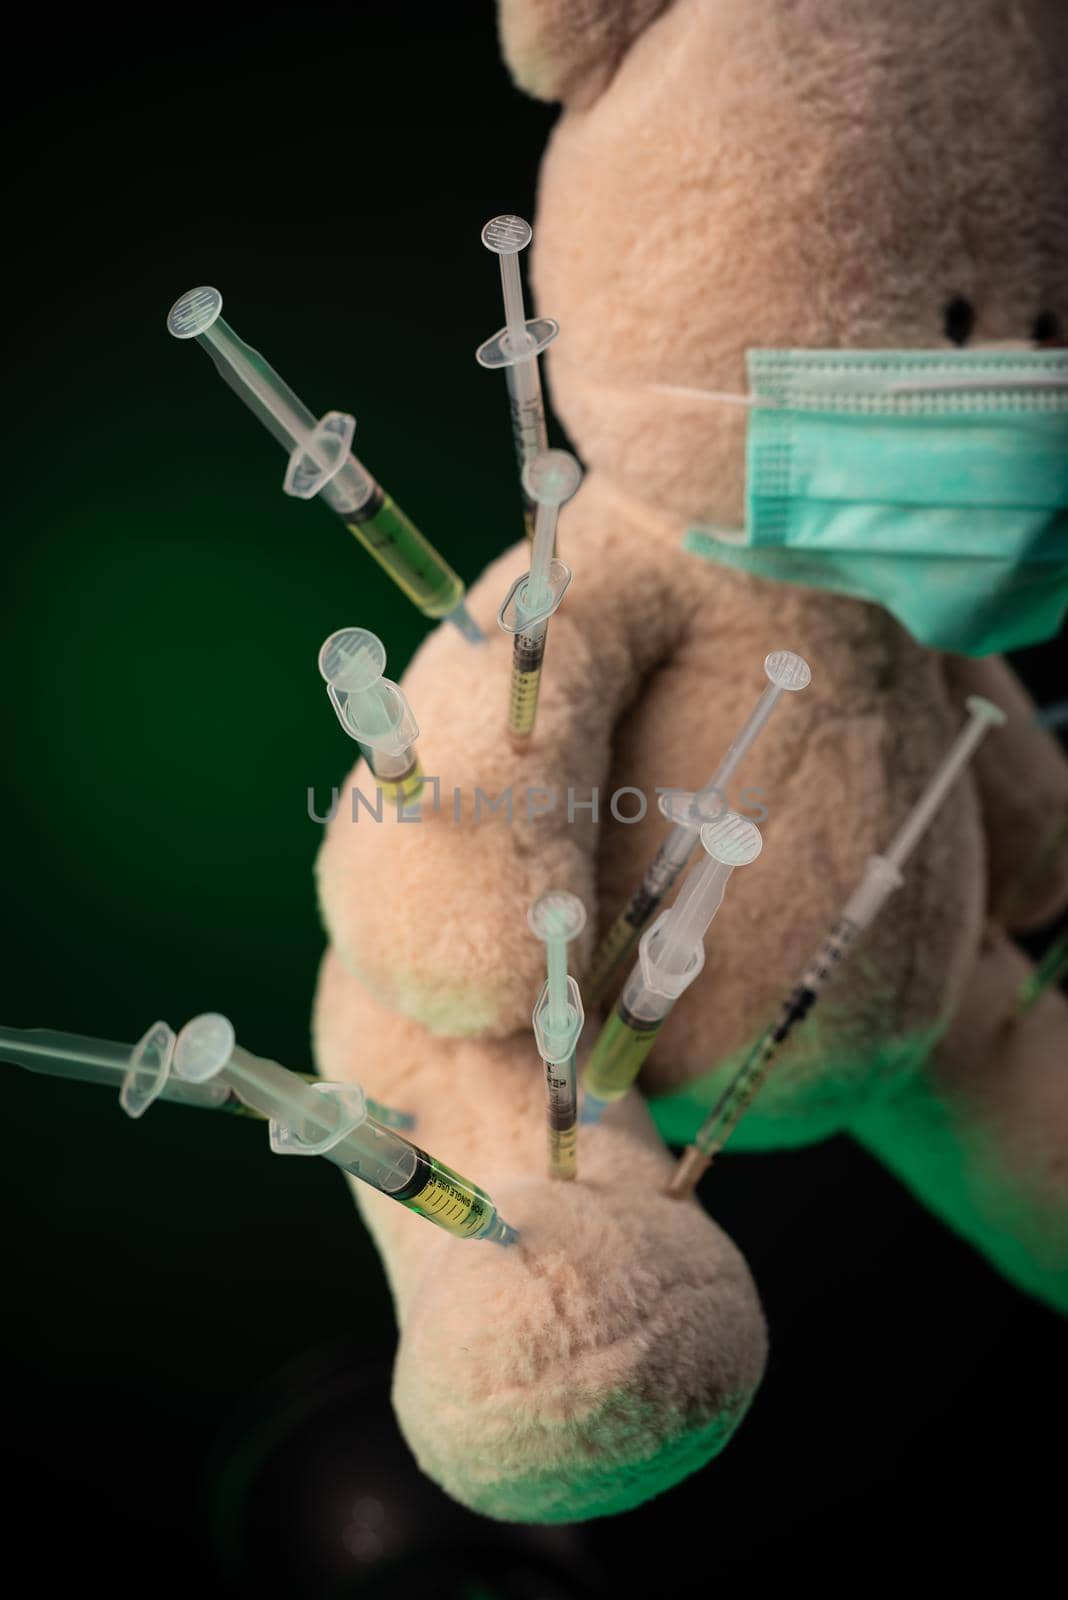 children's vaccination against the covid19 virus and vaccinations on the example of a teddy bear by Rotozey